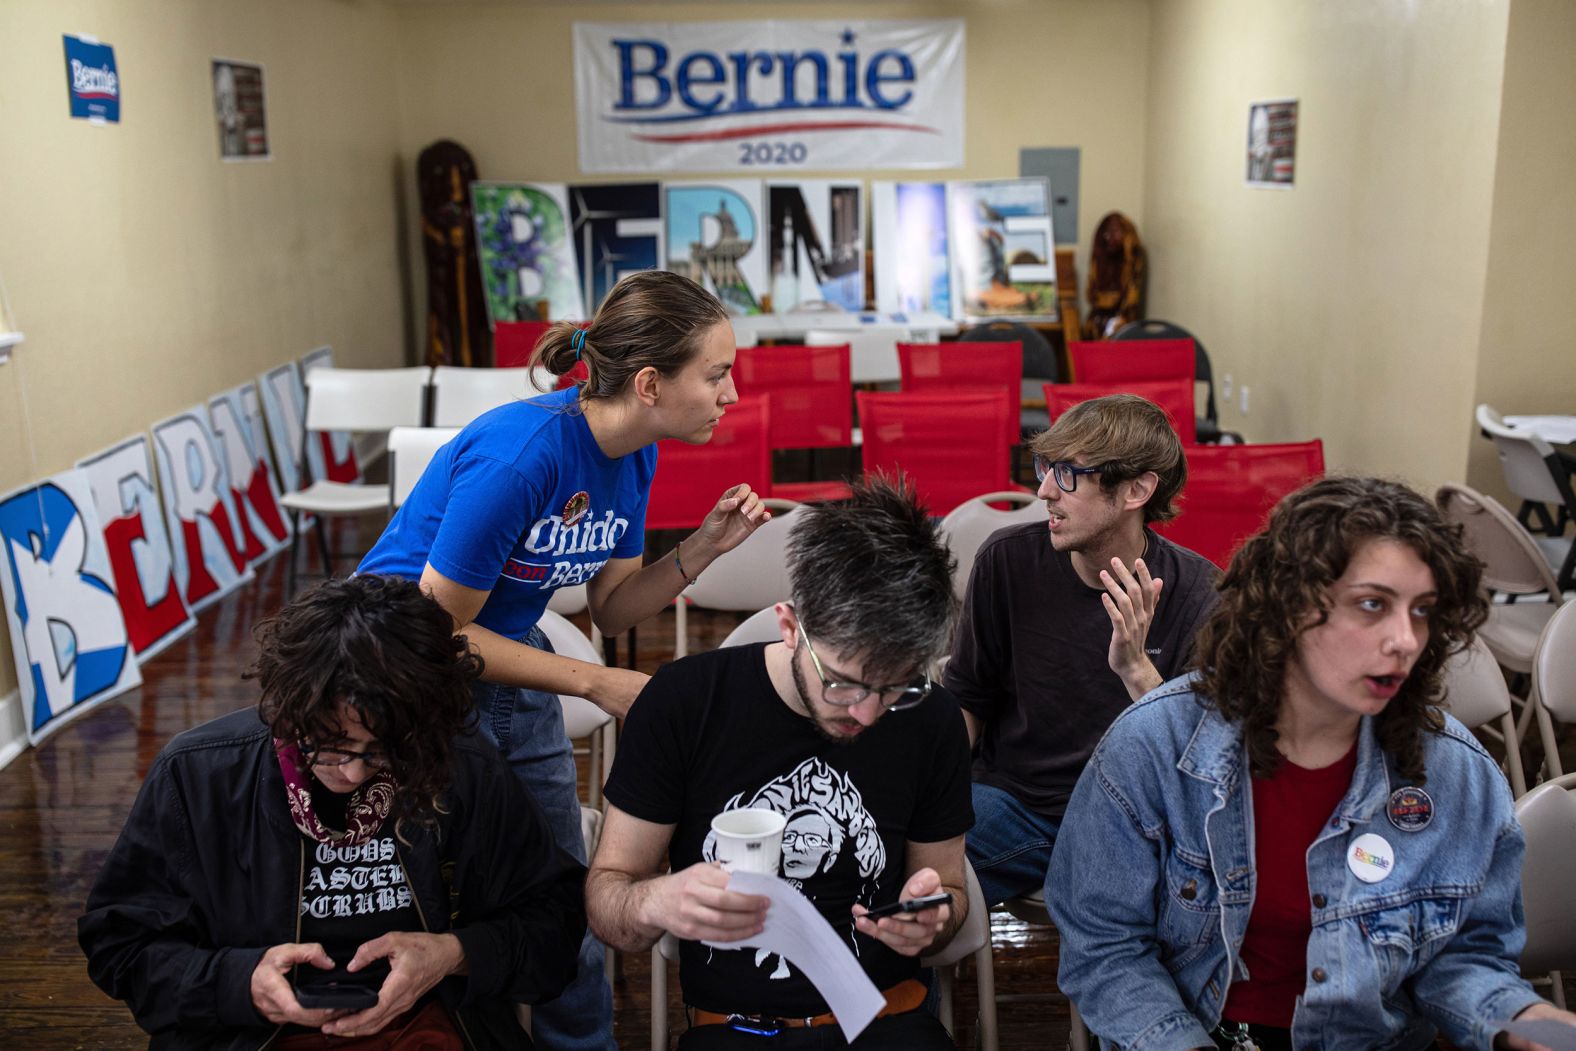 Solveij Rosa Praxis guides other Sanders volunteers through canvass training at Sanders' field office in Austin, Texas.